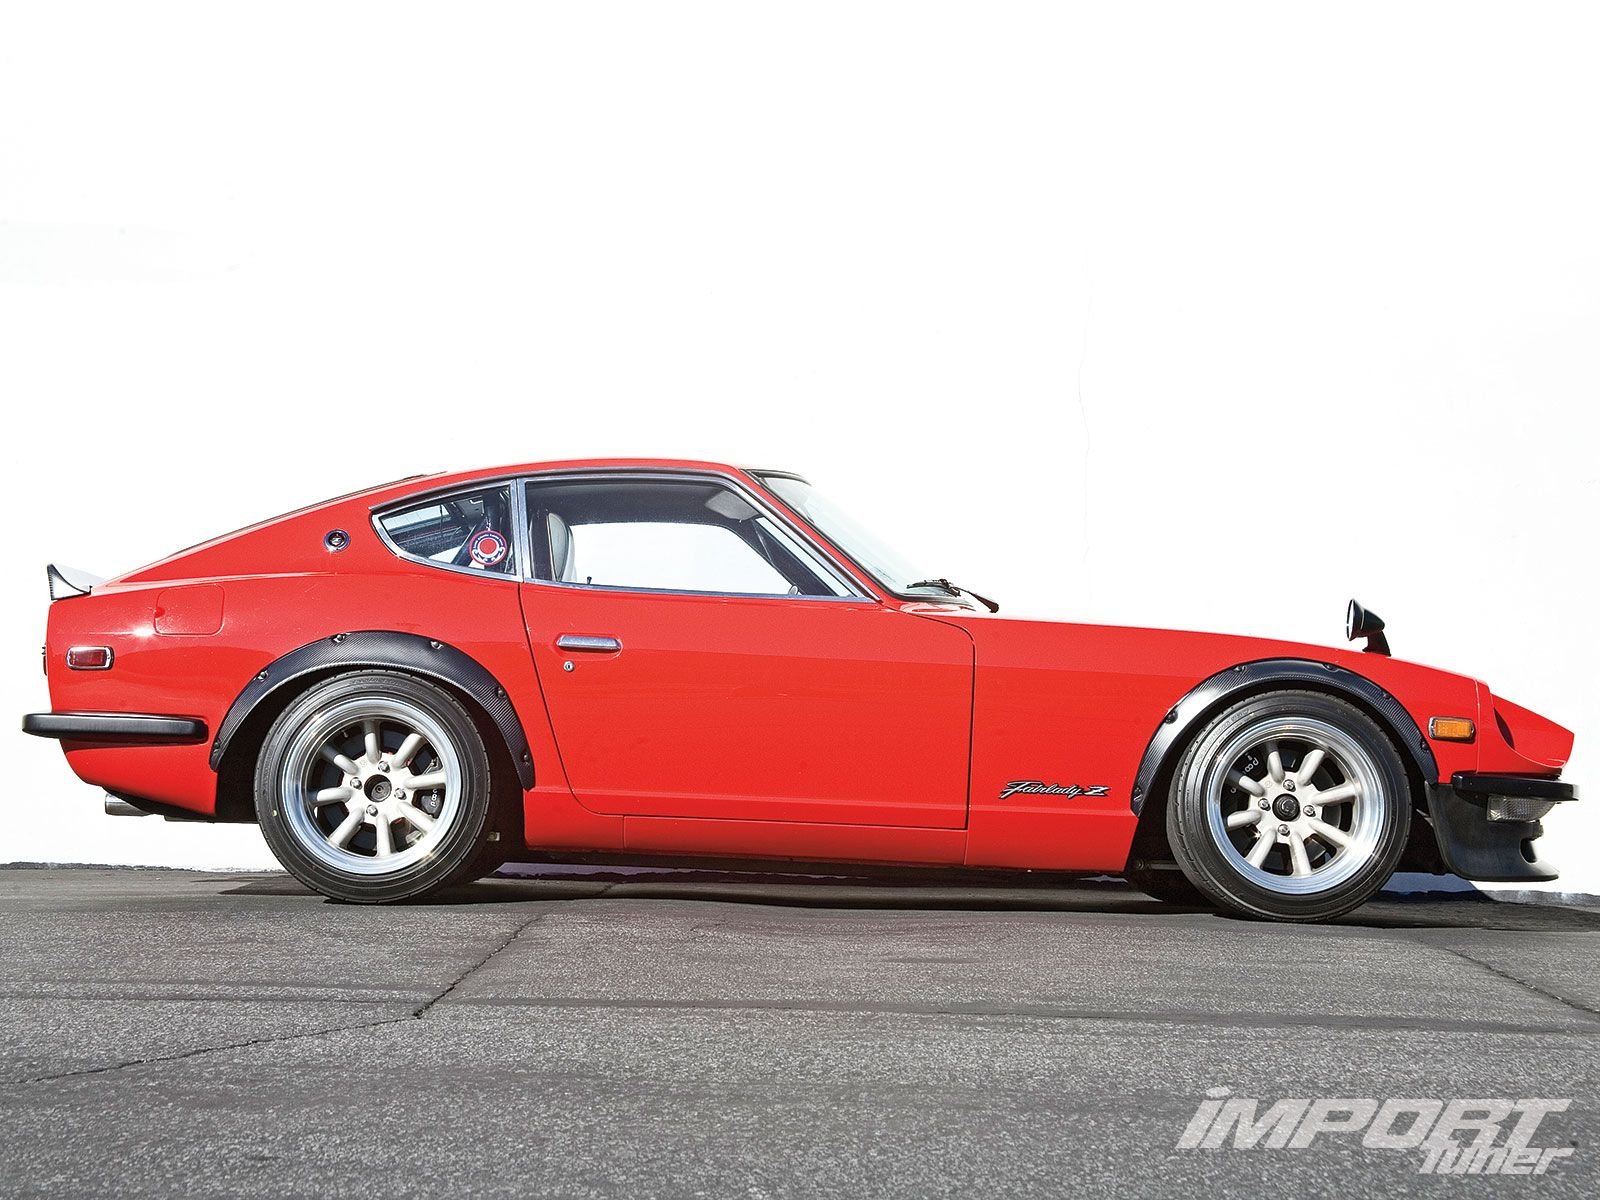 Datsun 240z Coupe Japan Tuning Cars Fairlady Wallpaper Background